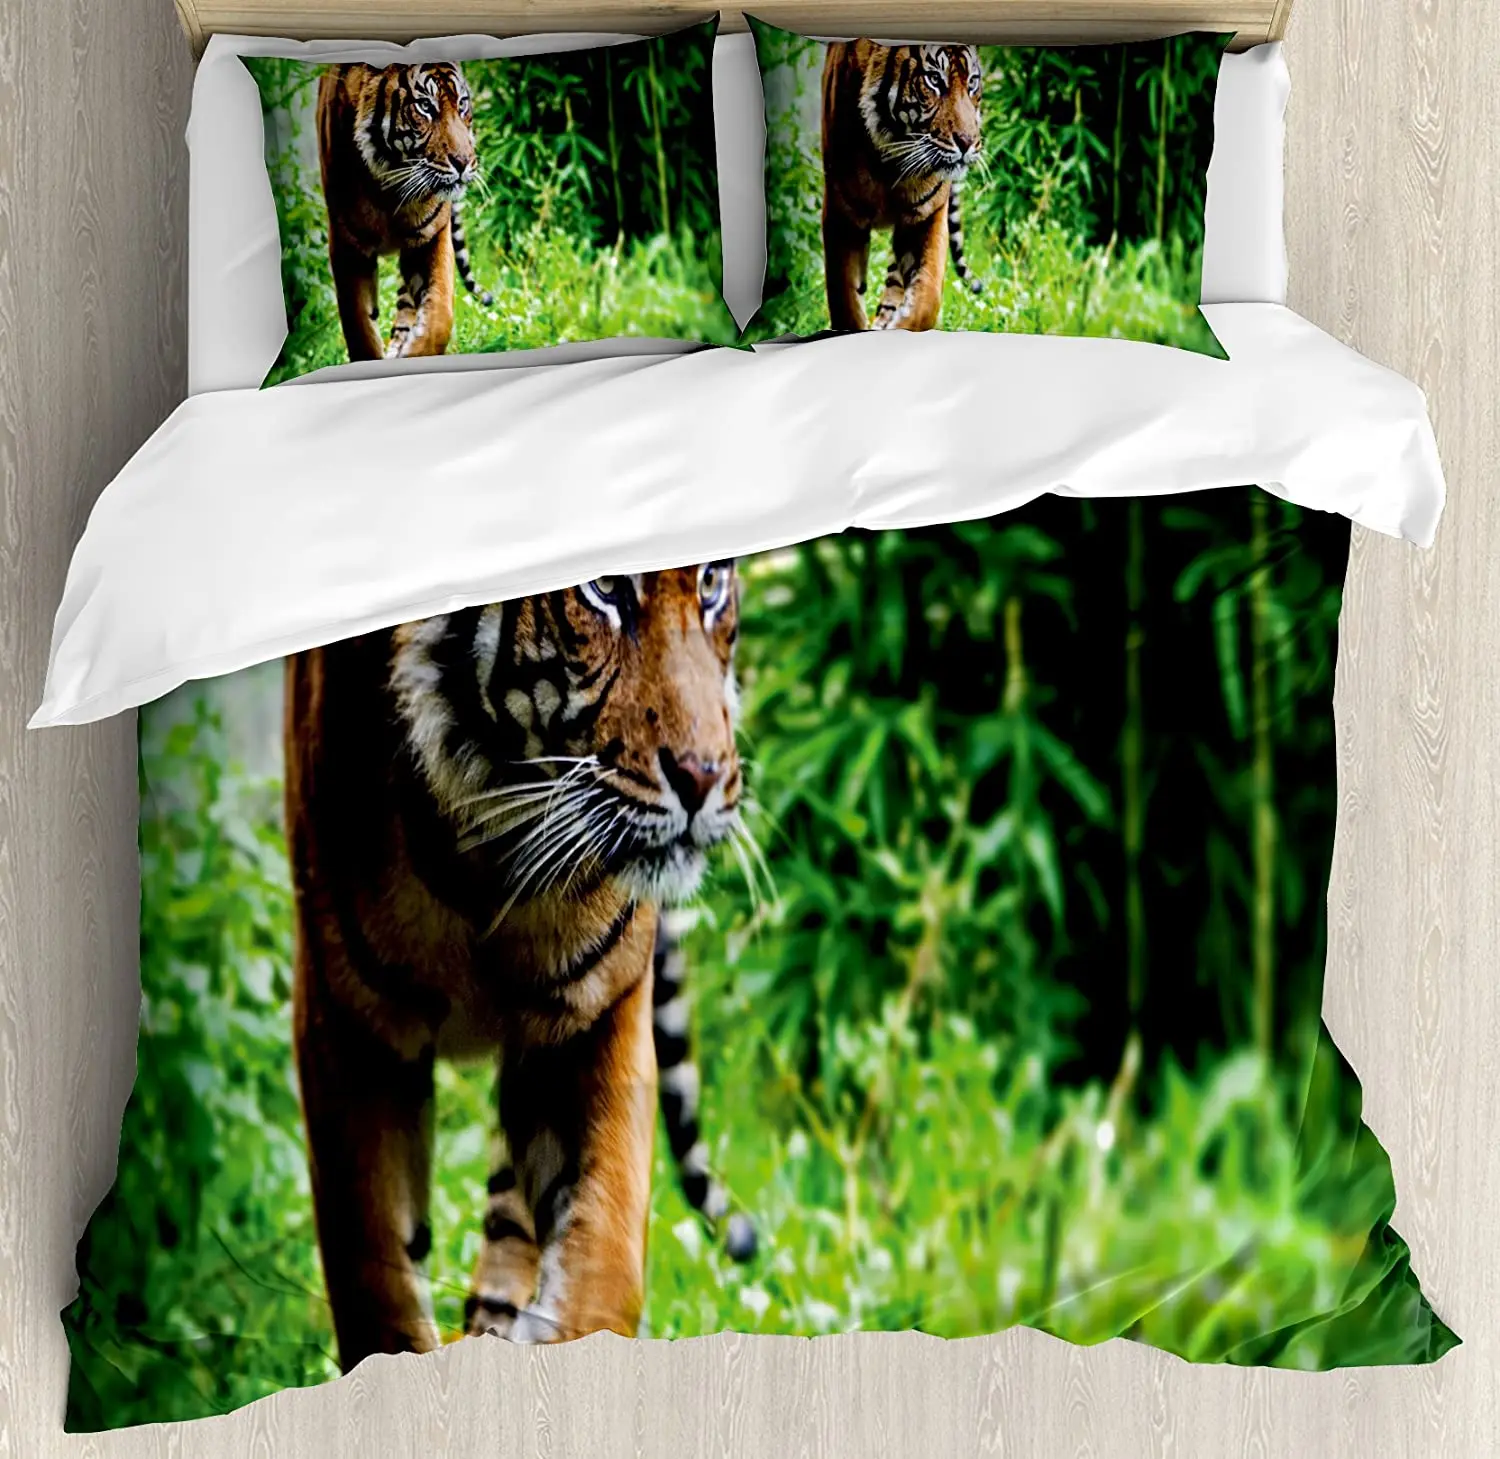 

Tiger Bedding Set For Bedroom Bed Home Siberian Large Feline at Zoo Wildlife at Captivity Duvet Cover Quilt Cover And Pillowcase